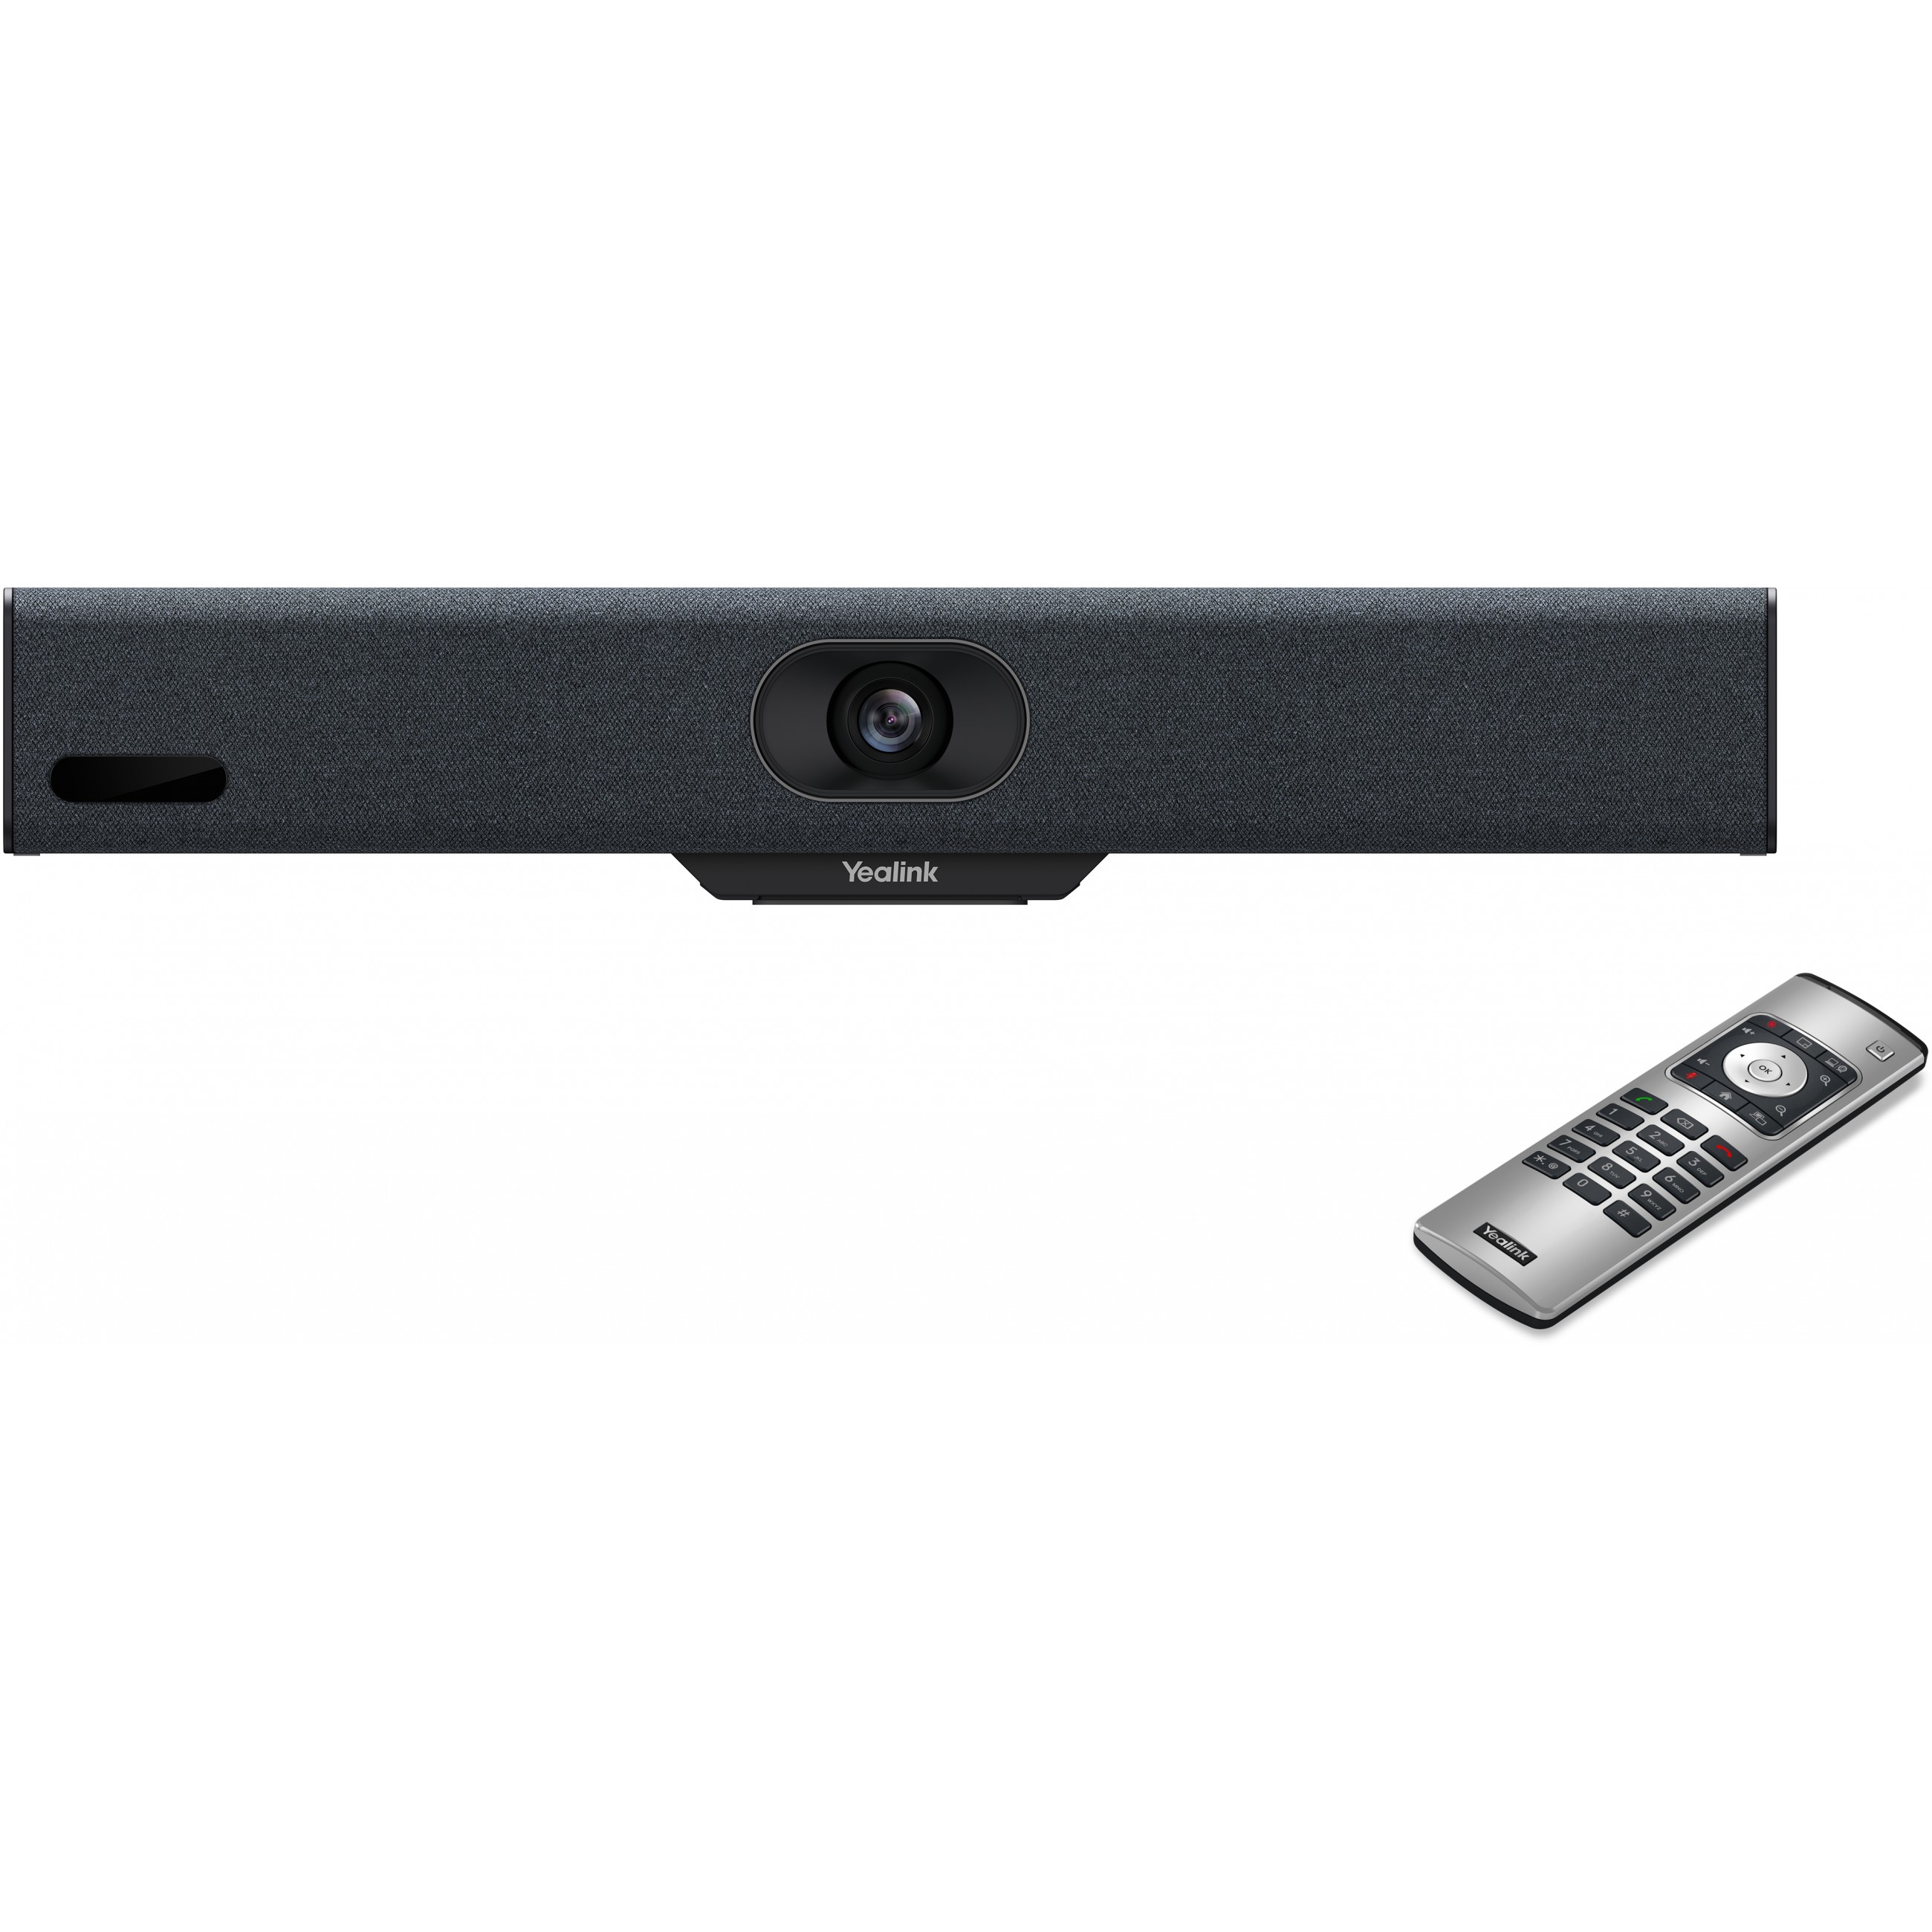 Yealink A10-010 video conferencing system - 1203680